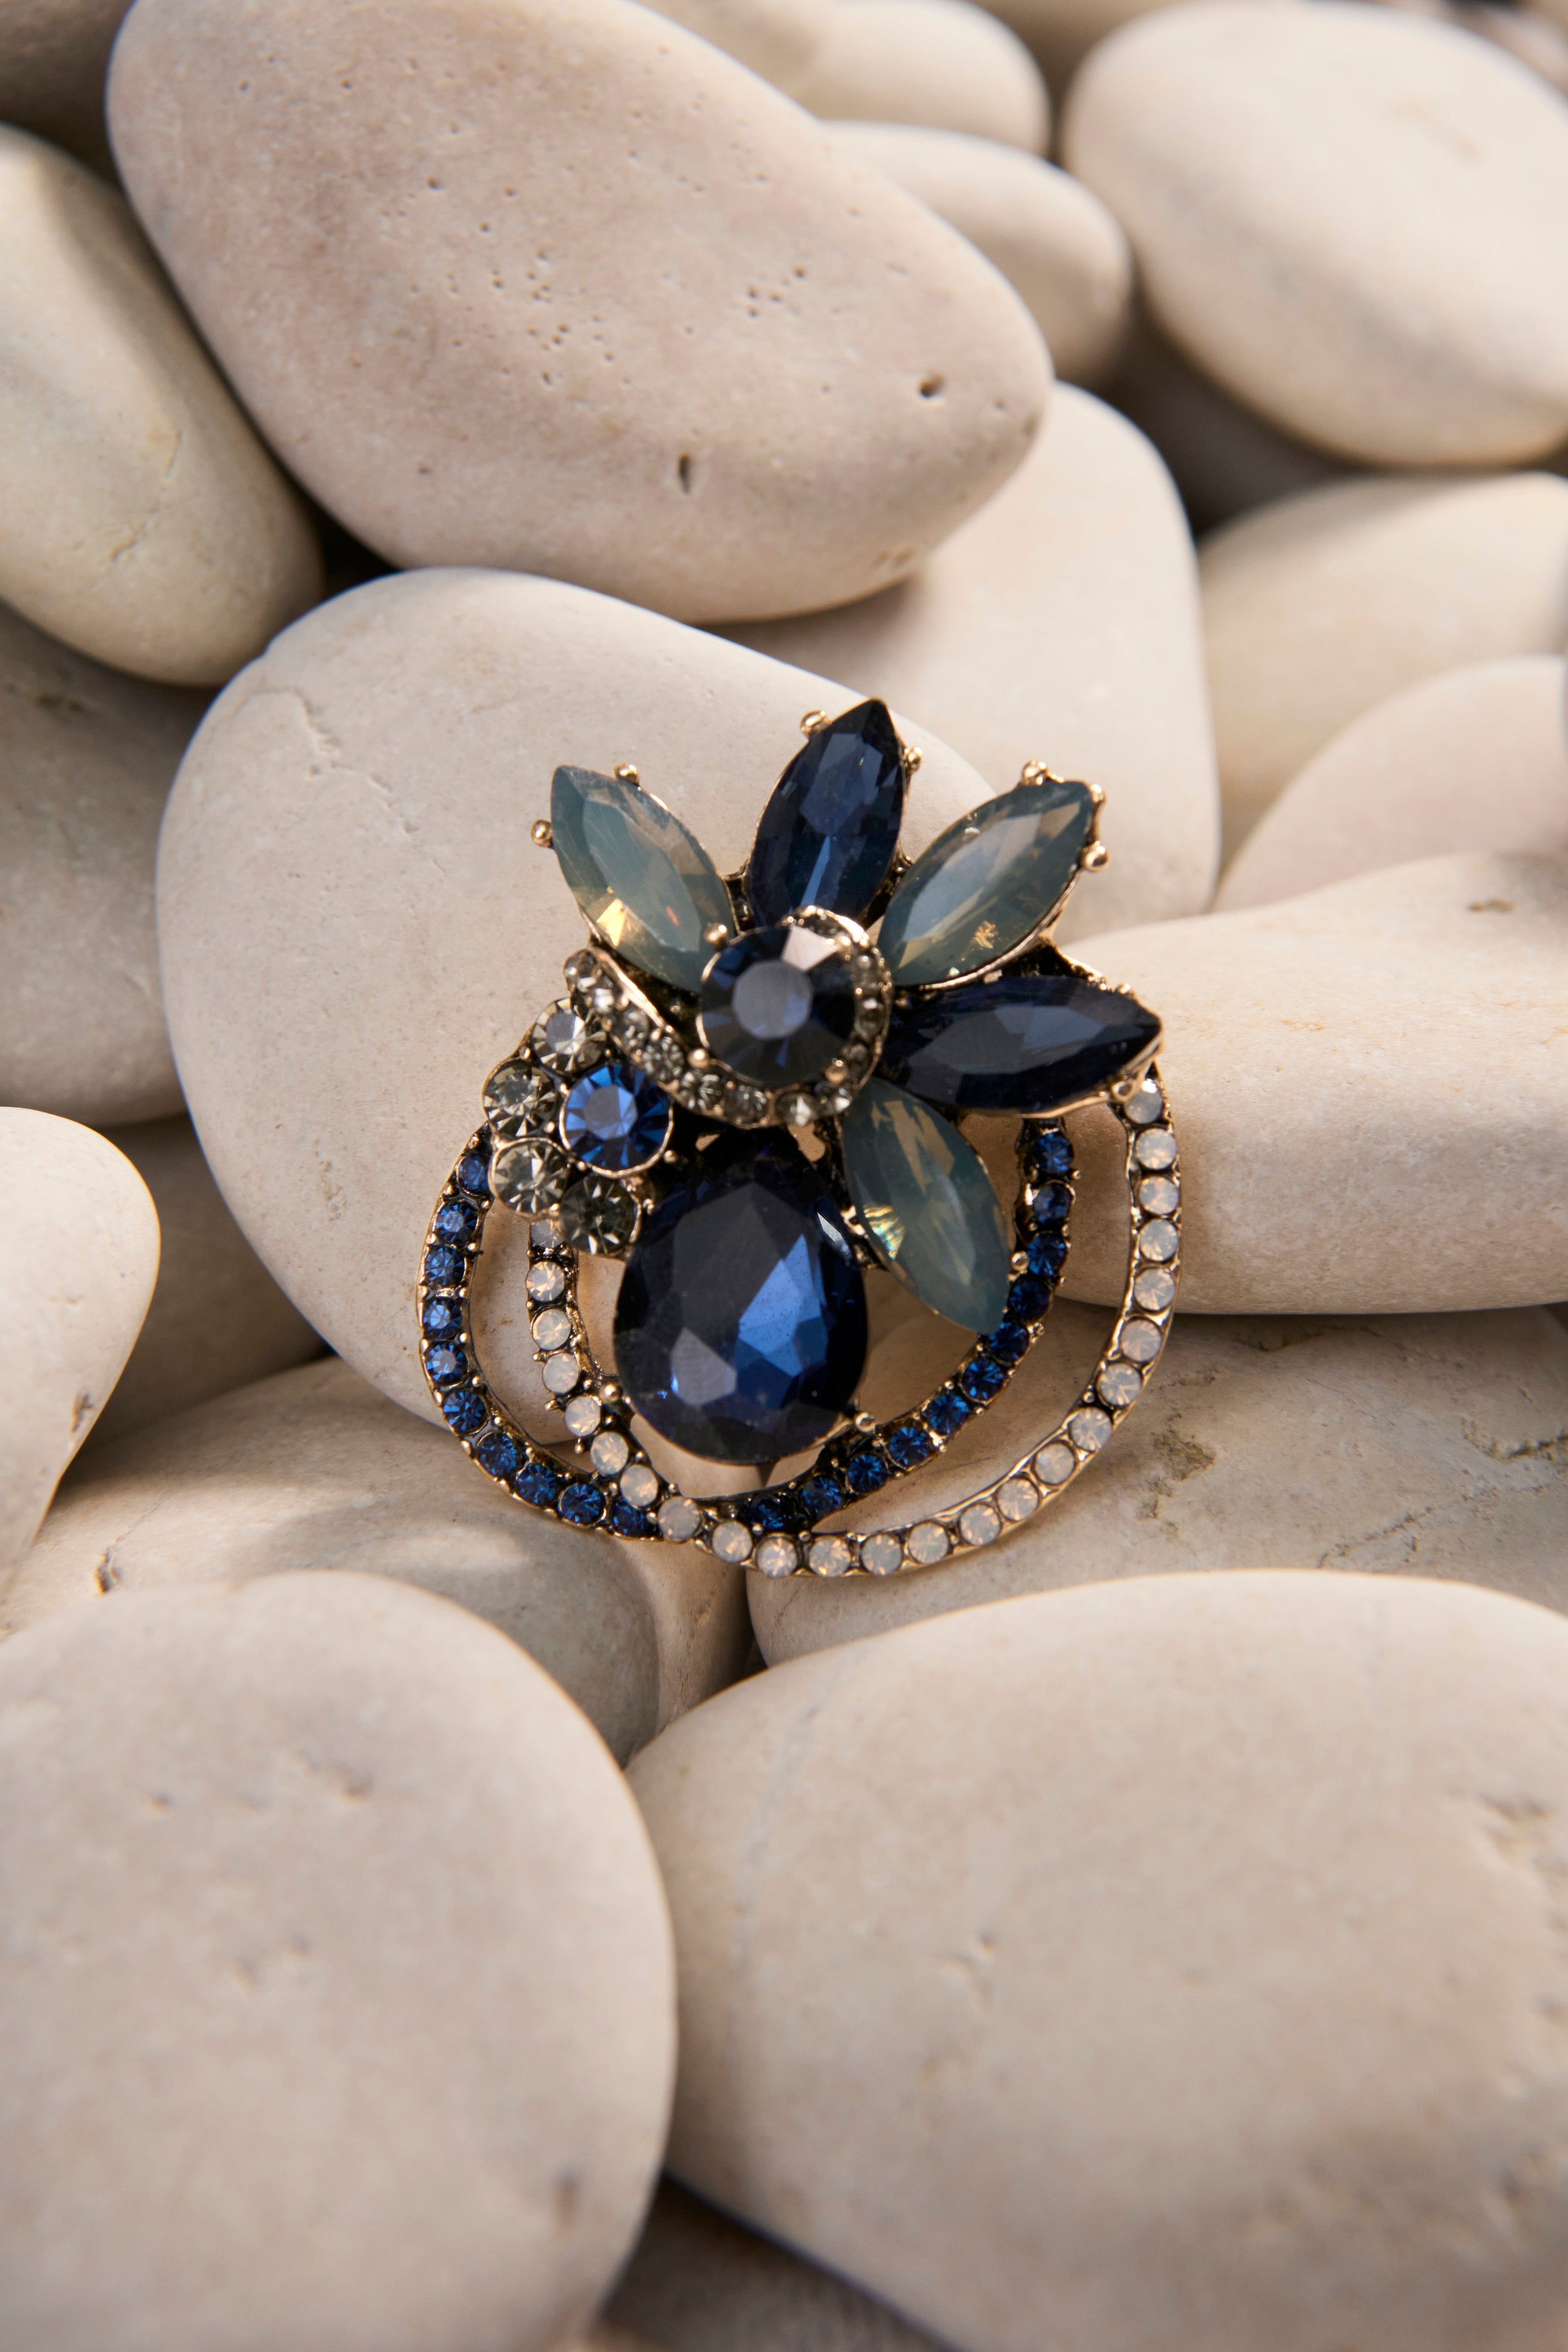 The Coil Petal Brooch sits on a bed of smooth white tones. The brooch features an array of faceted blue stones with fine sparkling stone detailing. 